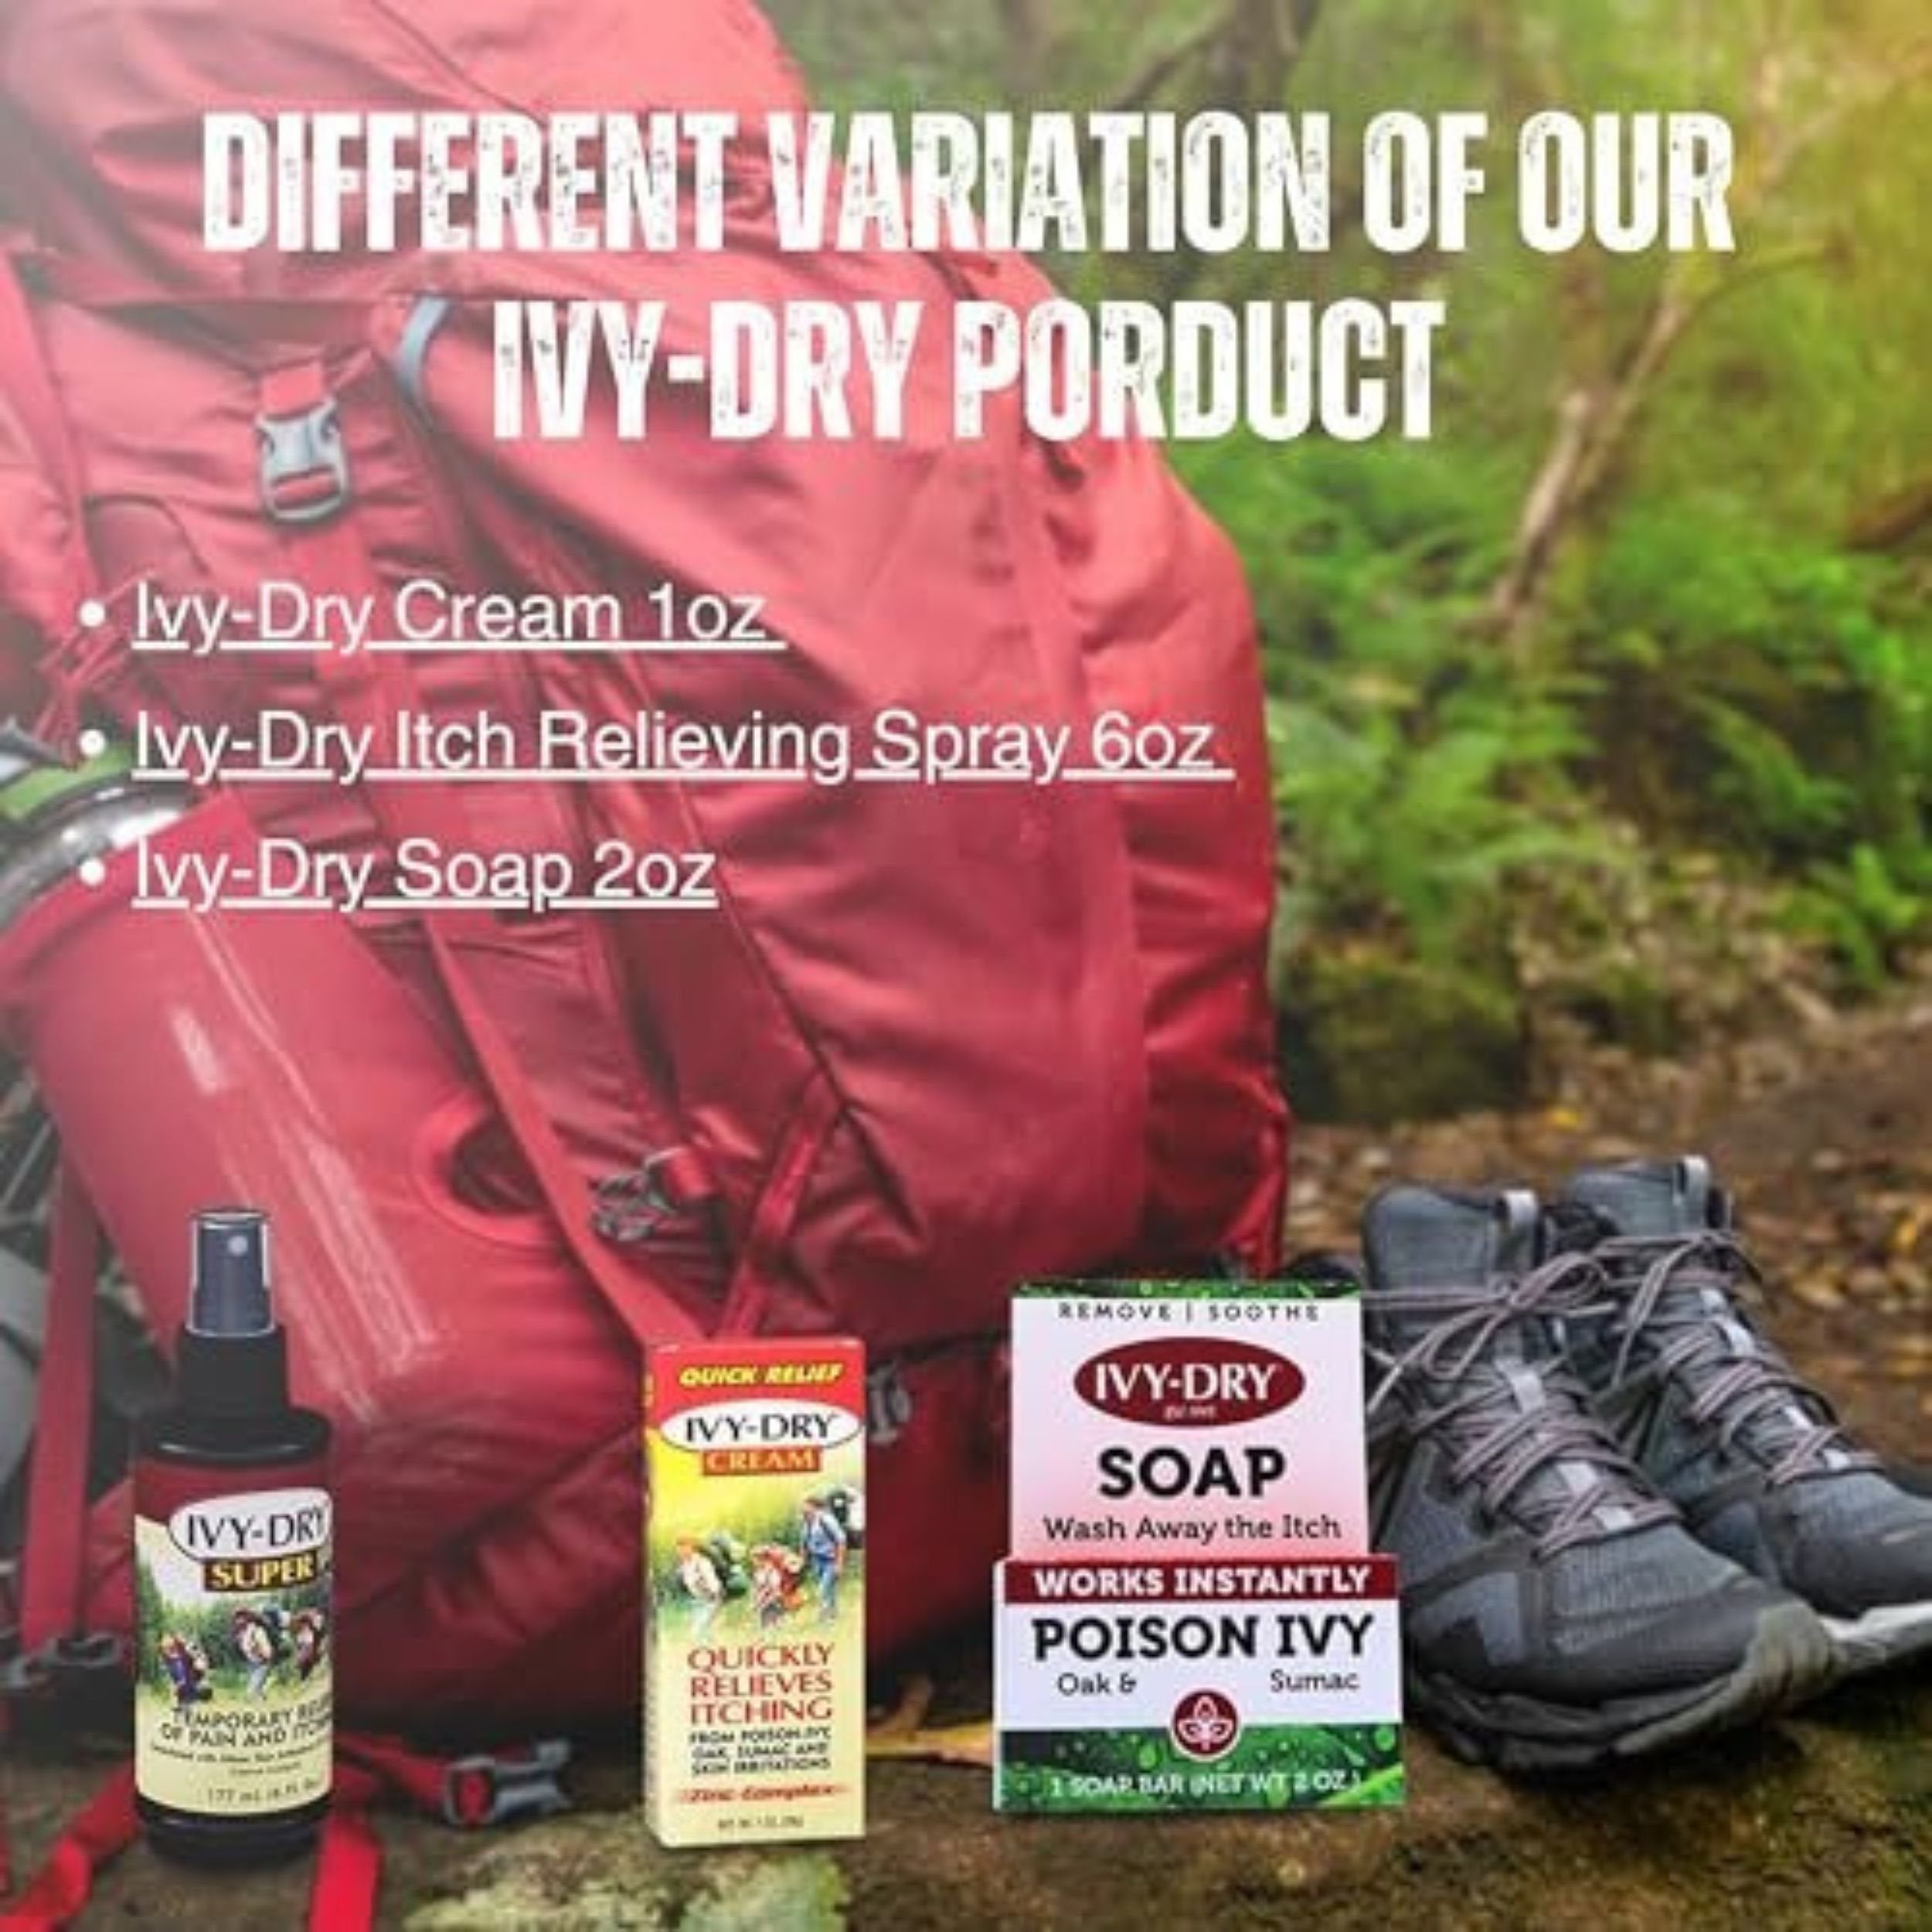 Worldwide Nutrition Bundle, 2 Items: Ivy-Dry Soap - Complete Body Wash - Fast and Effective Poison Oak Soap and Poison Ivy Relief - 1 Pack, 2 Oz Poison Ivy Soap Bar and Multi-Purpose Key Chain